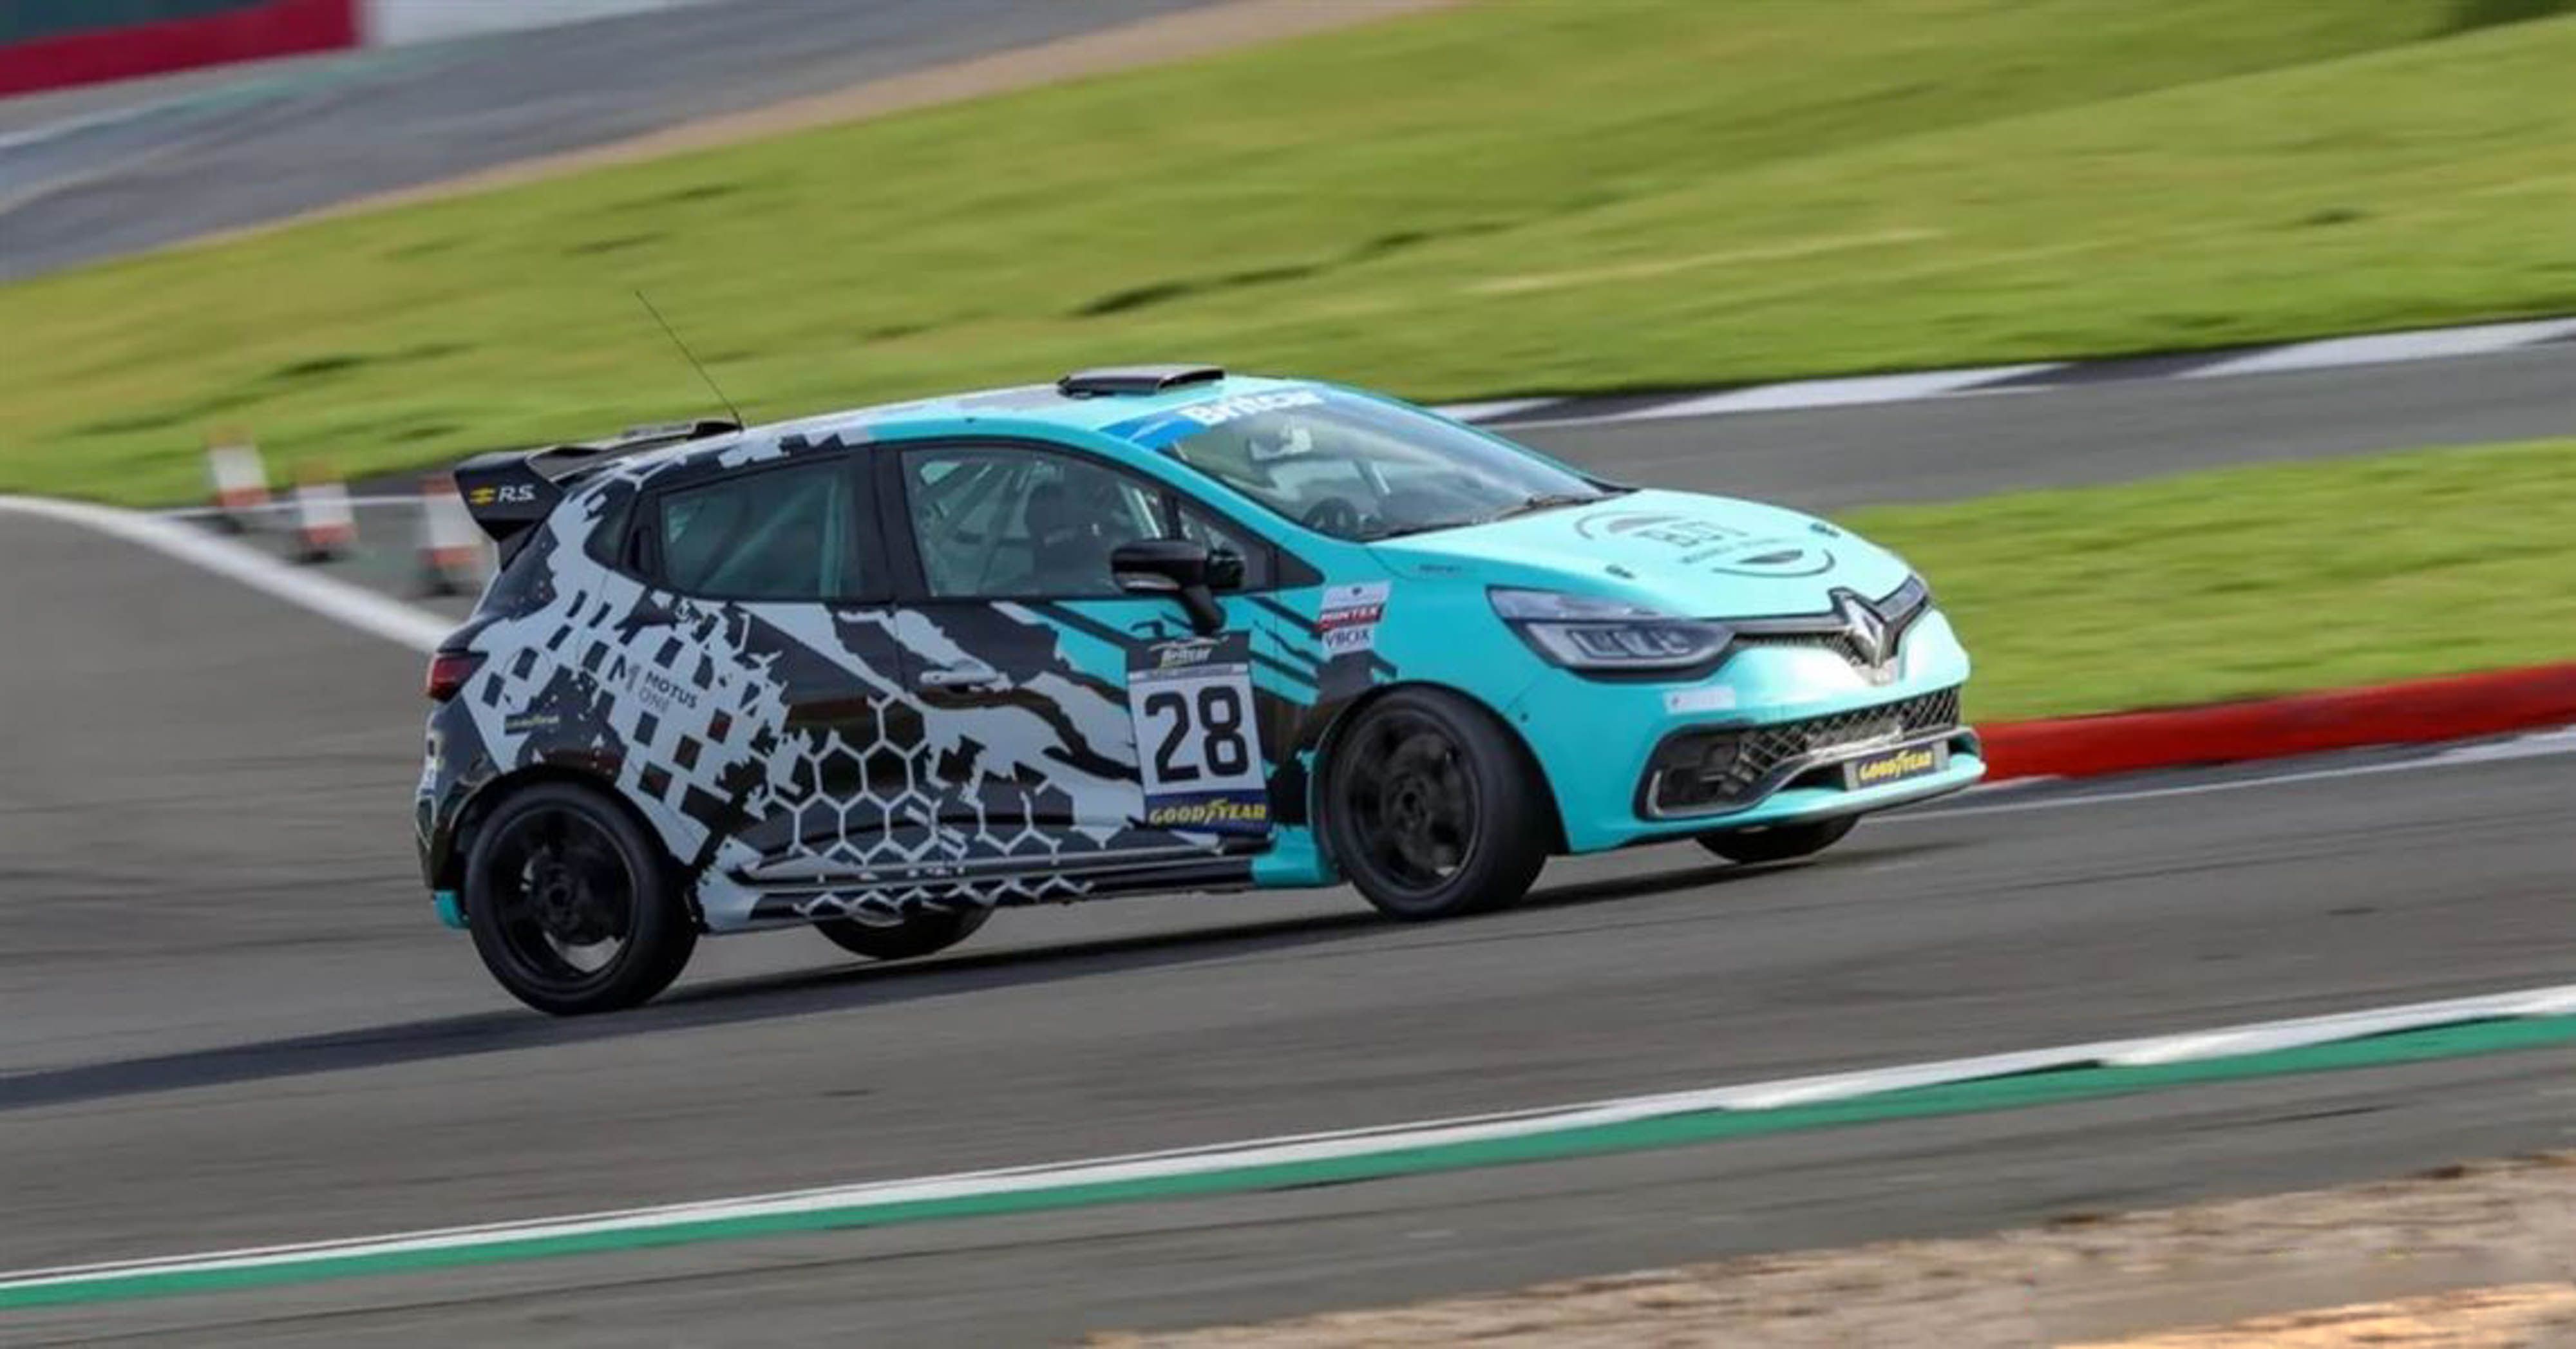 2017 Renault (르노) CLIO CUP